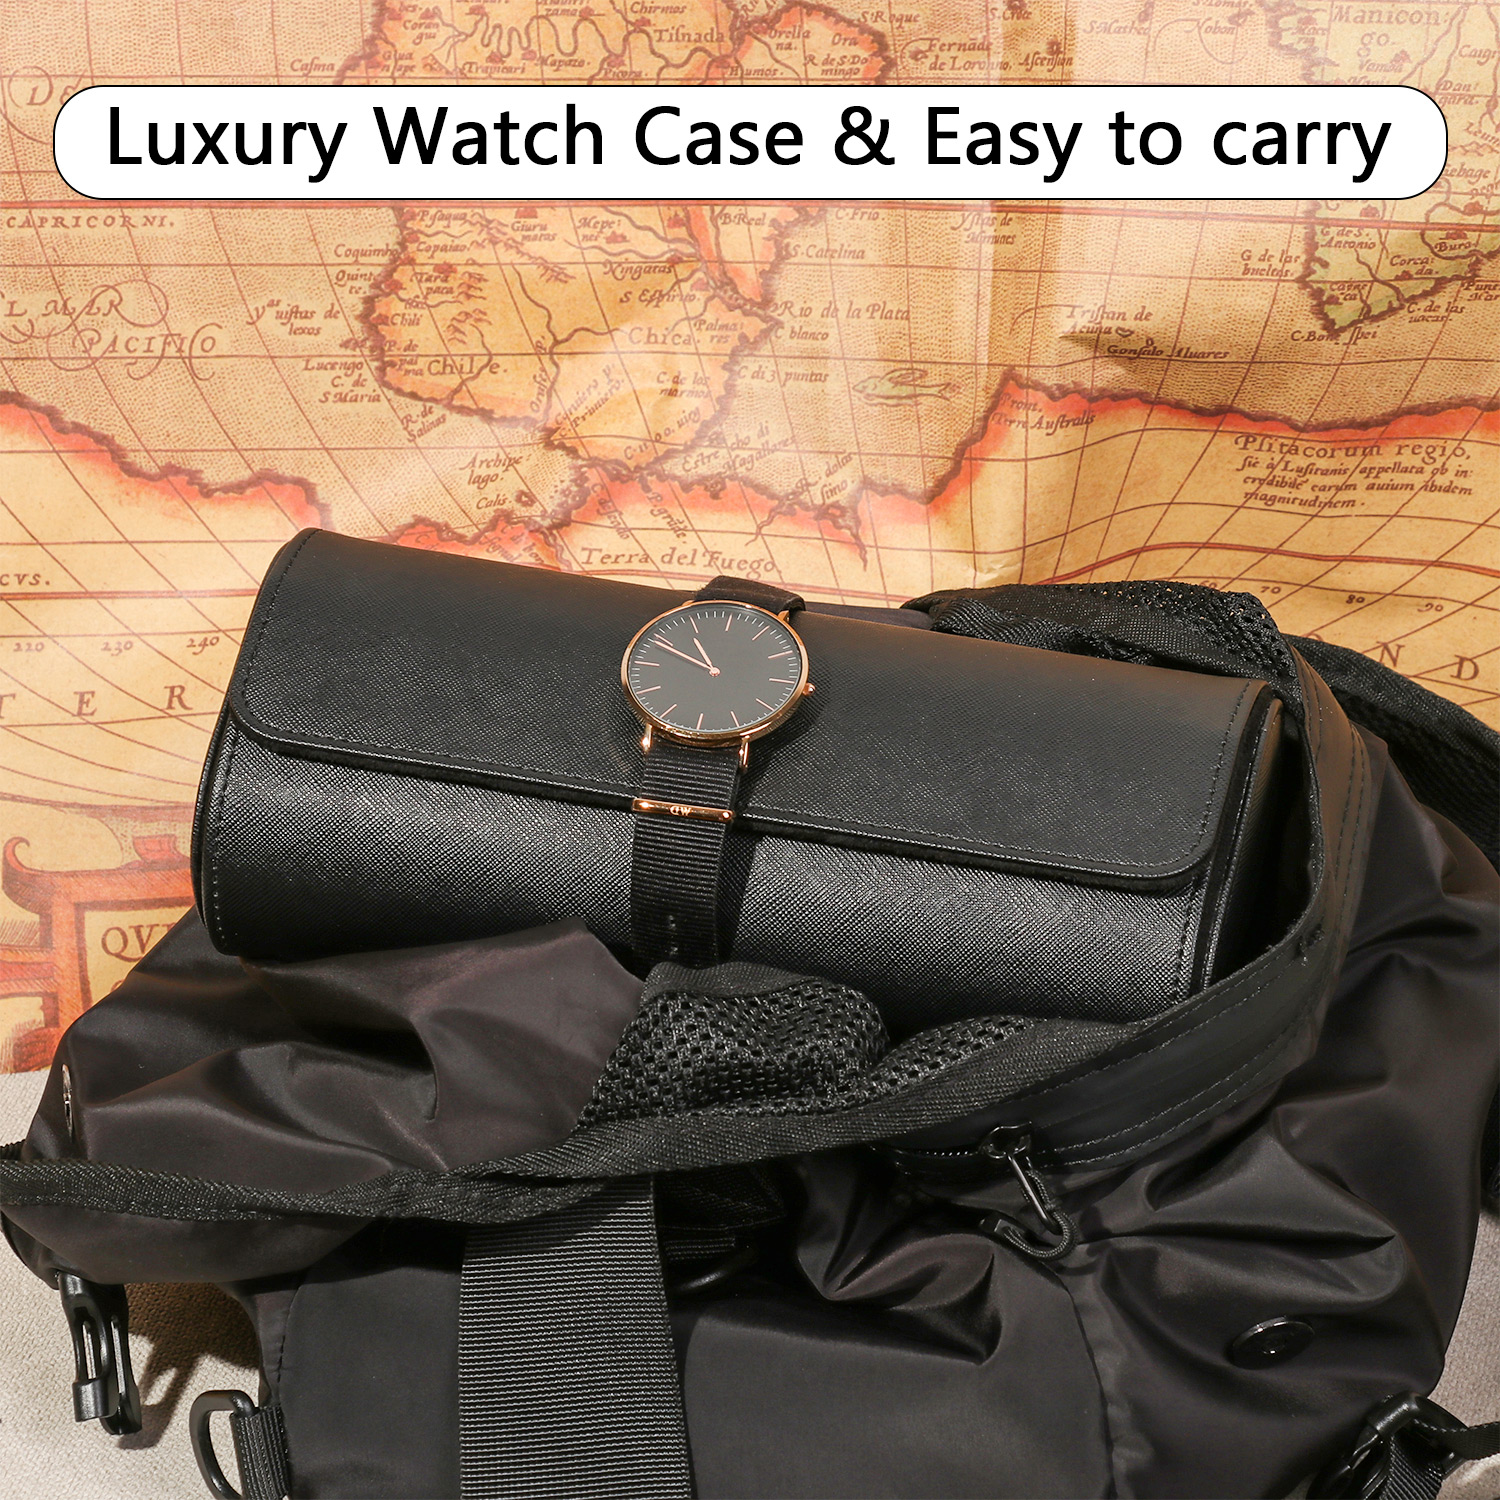 HS Men Watch Roll Travel Case Black Watch Case Organizer Portable 3 Watch Storage Watch Roll Gifts Removable Pillows Display PU Leather/Multicolor